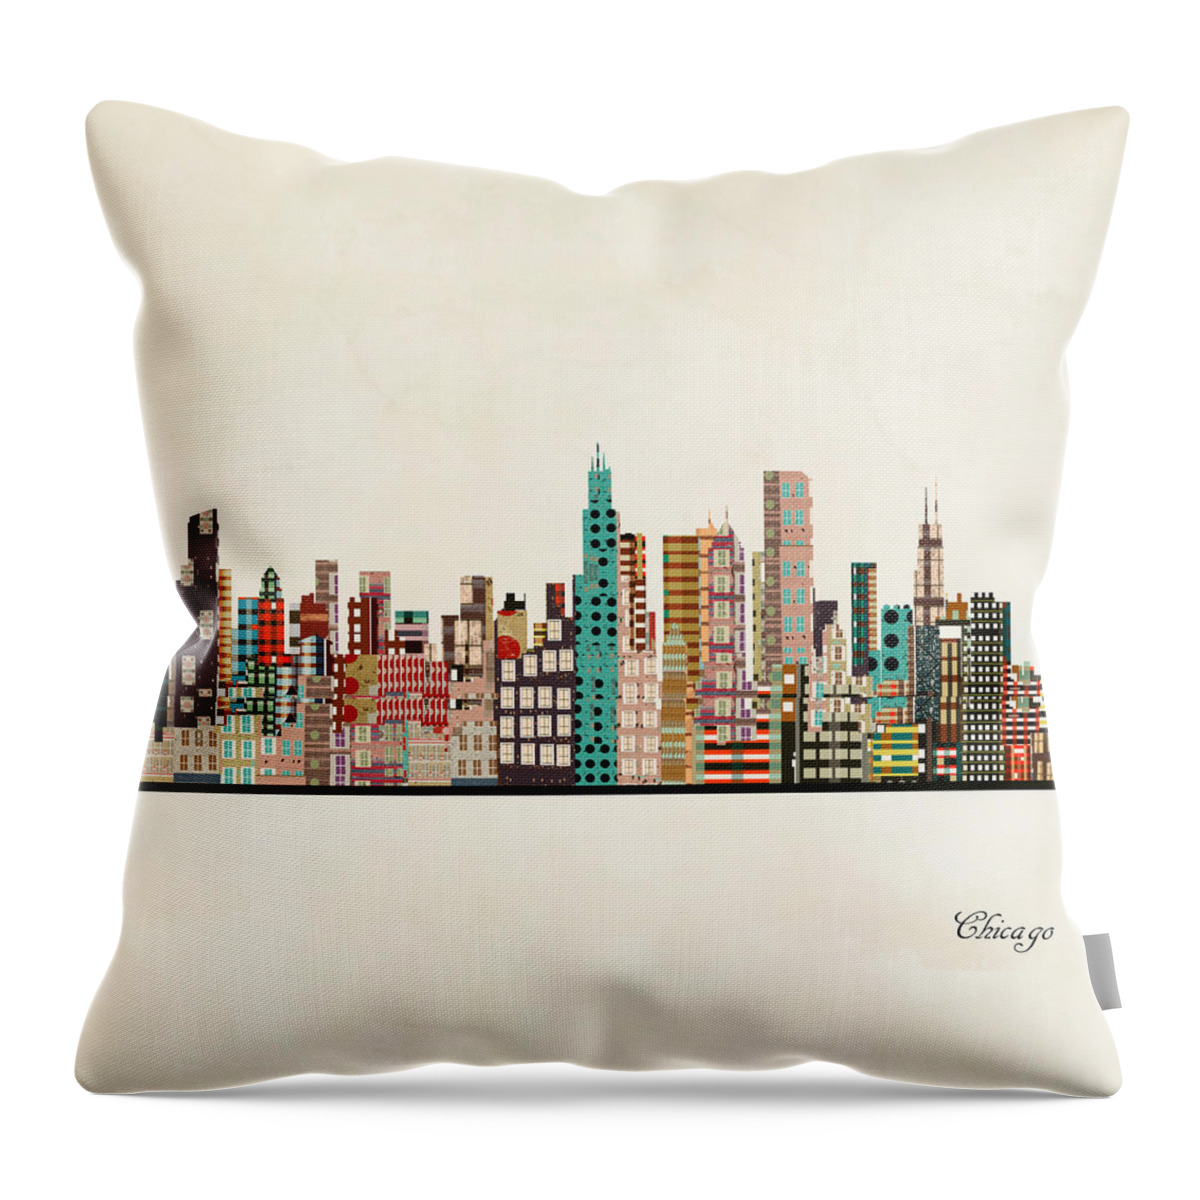 Chicago Throw Pillow featuring the painting Chicago Illinois Skyline by Bri Buckley